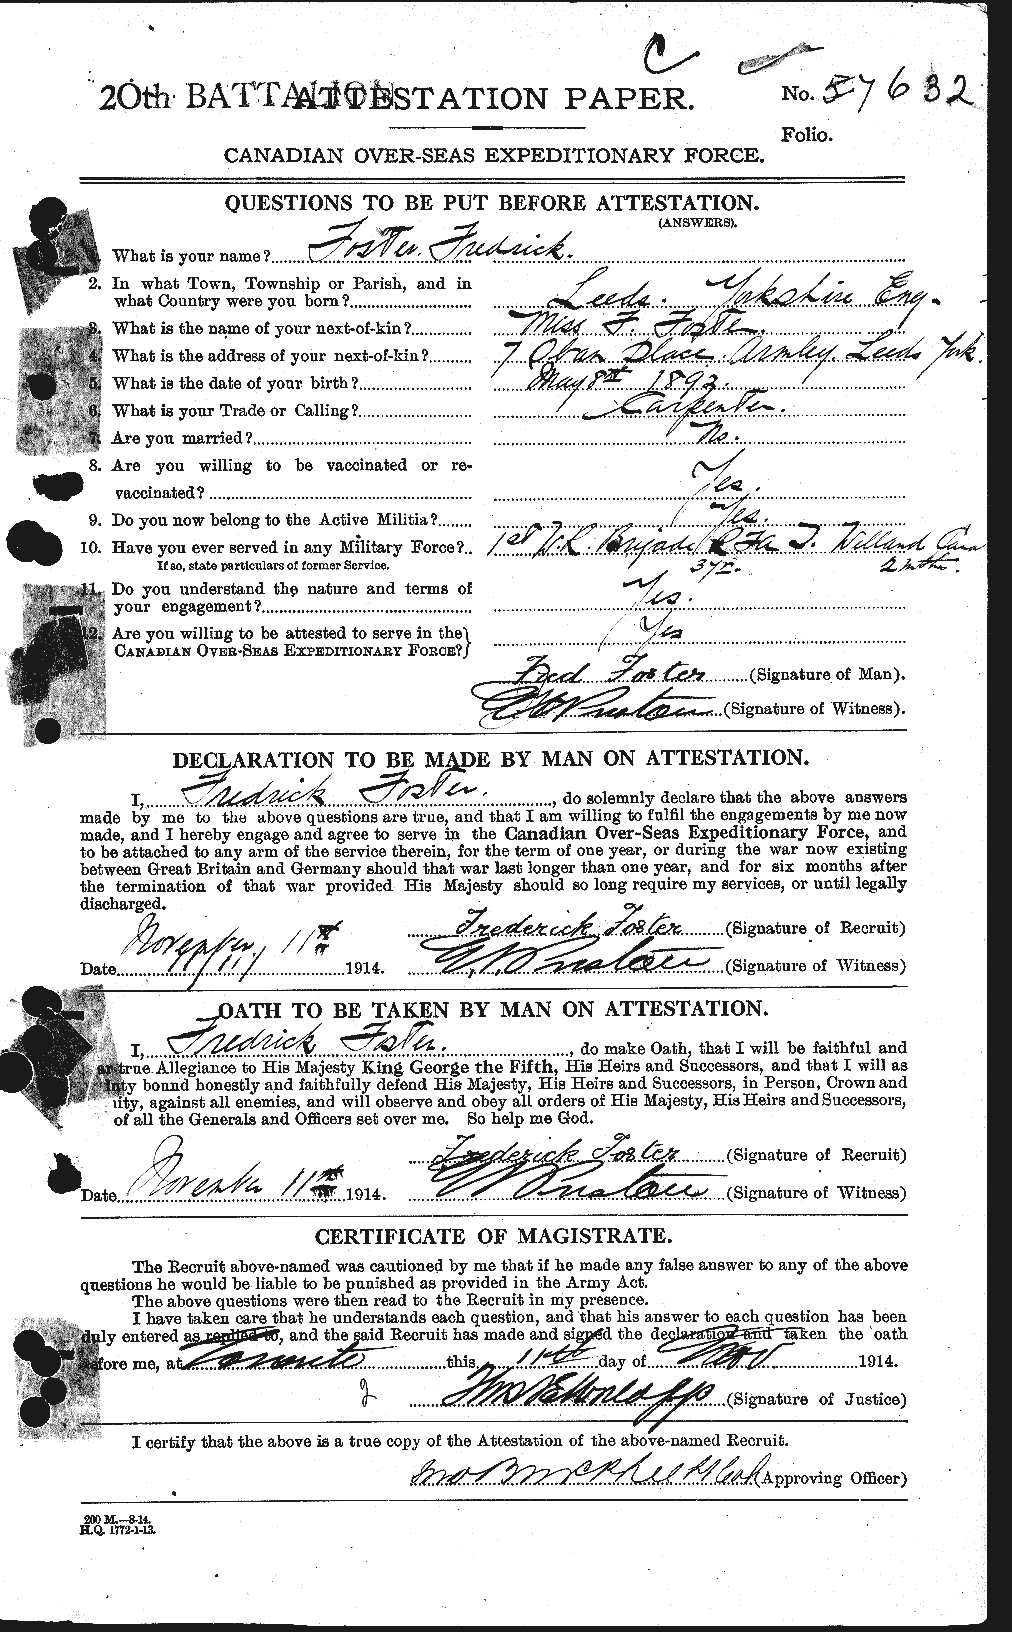 Personnel Records of the First World War - CEF 330645a